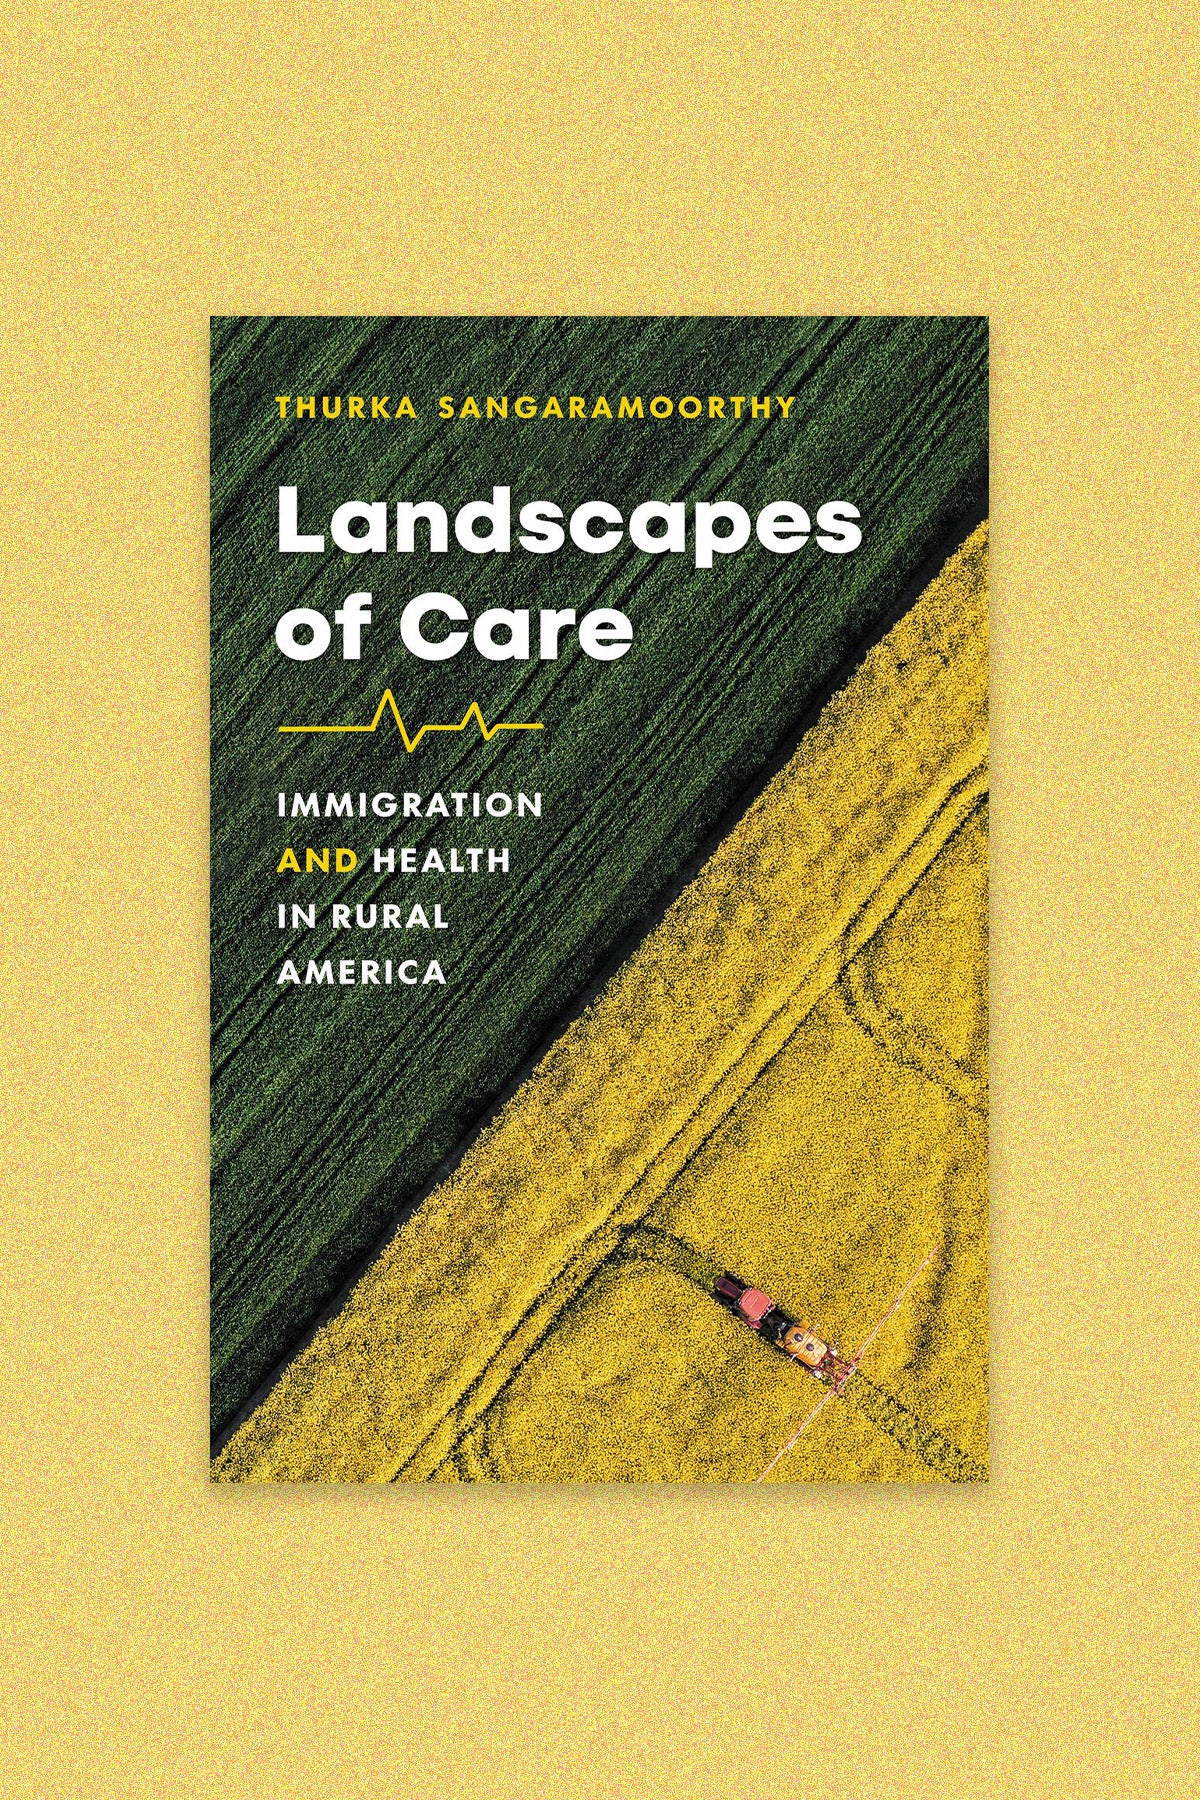 Book cover for “Landscapes of Care: Immigration and health in rural America” by Thunk Sangaramoorthy. The book cover is a birds-eye of a green field and yellow field directed by a diagonal line.